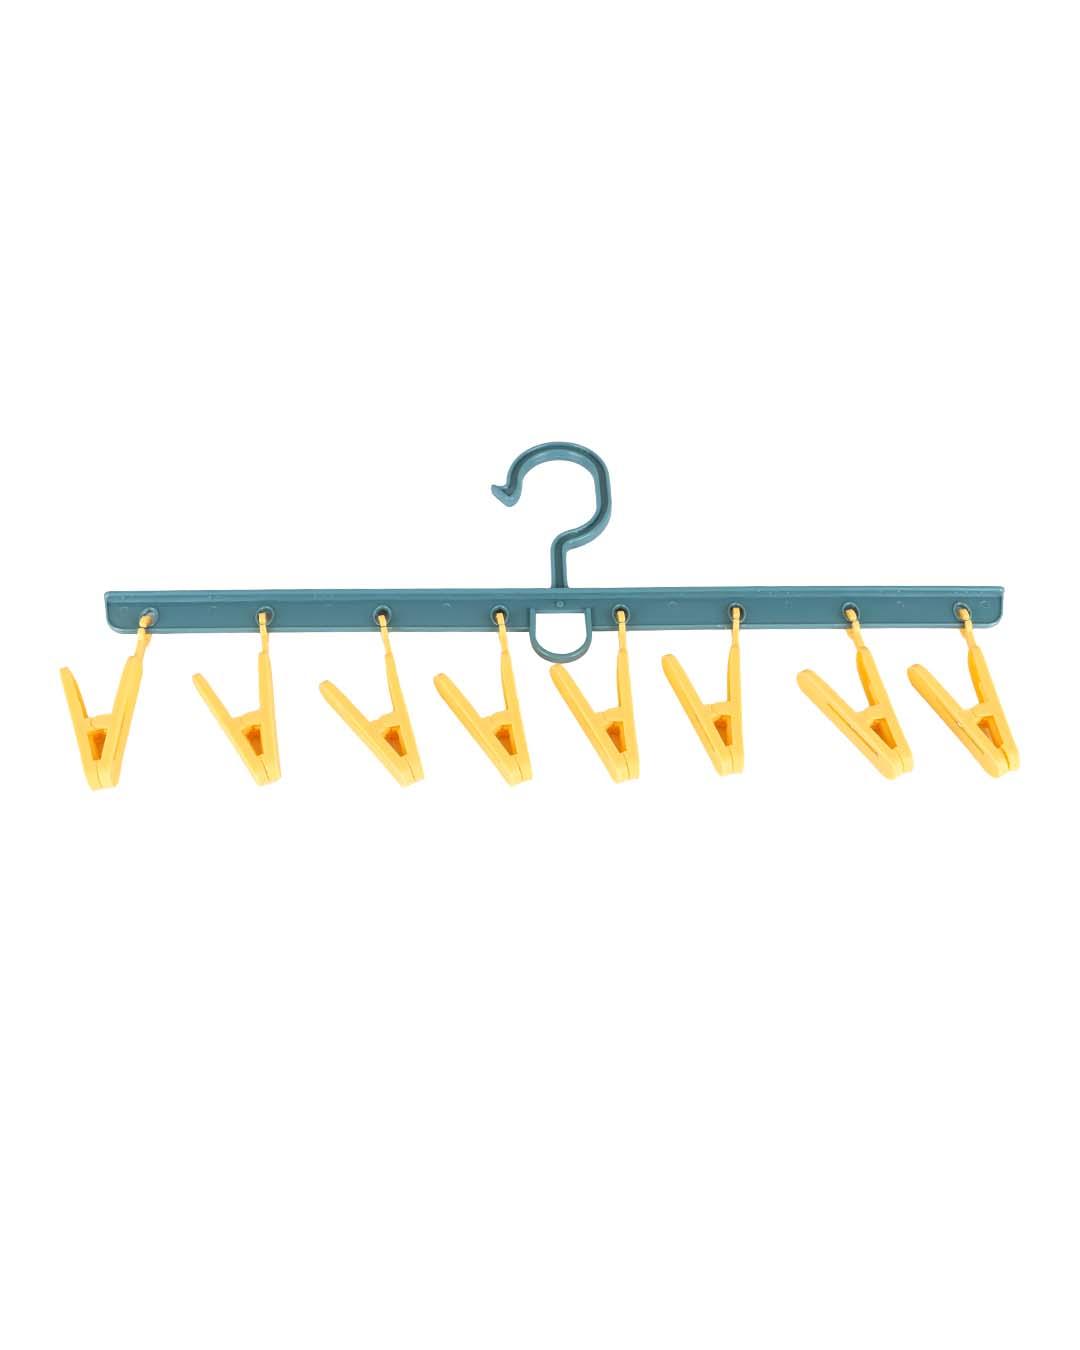 Hanger Bar with 8 Pegs, Yellow, Plastic - MARKET 99